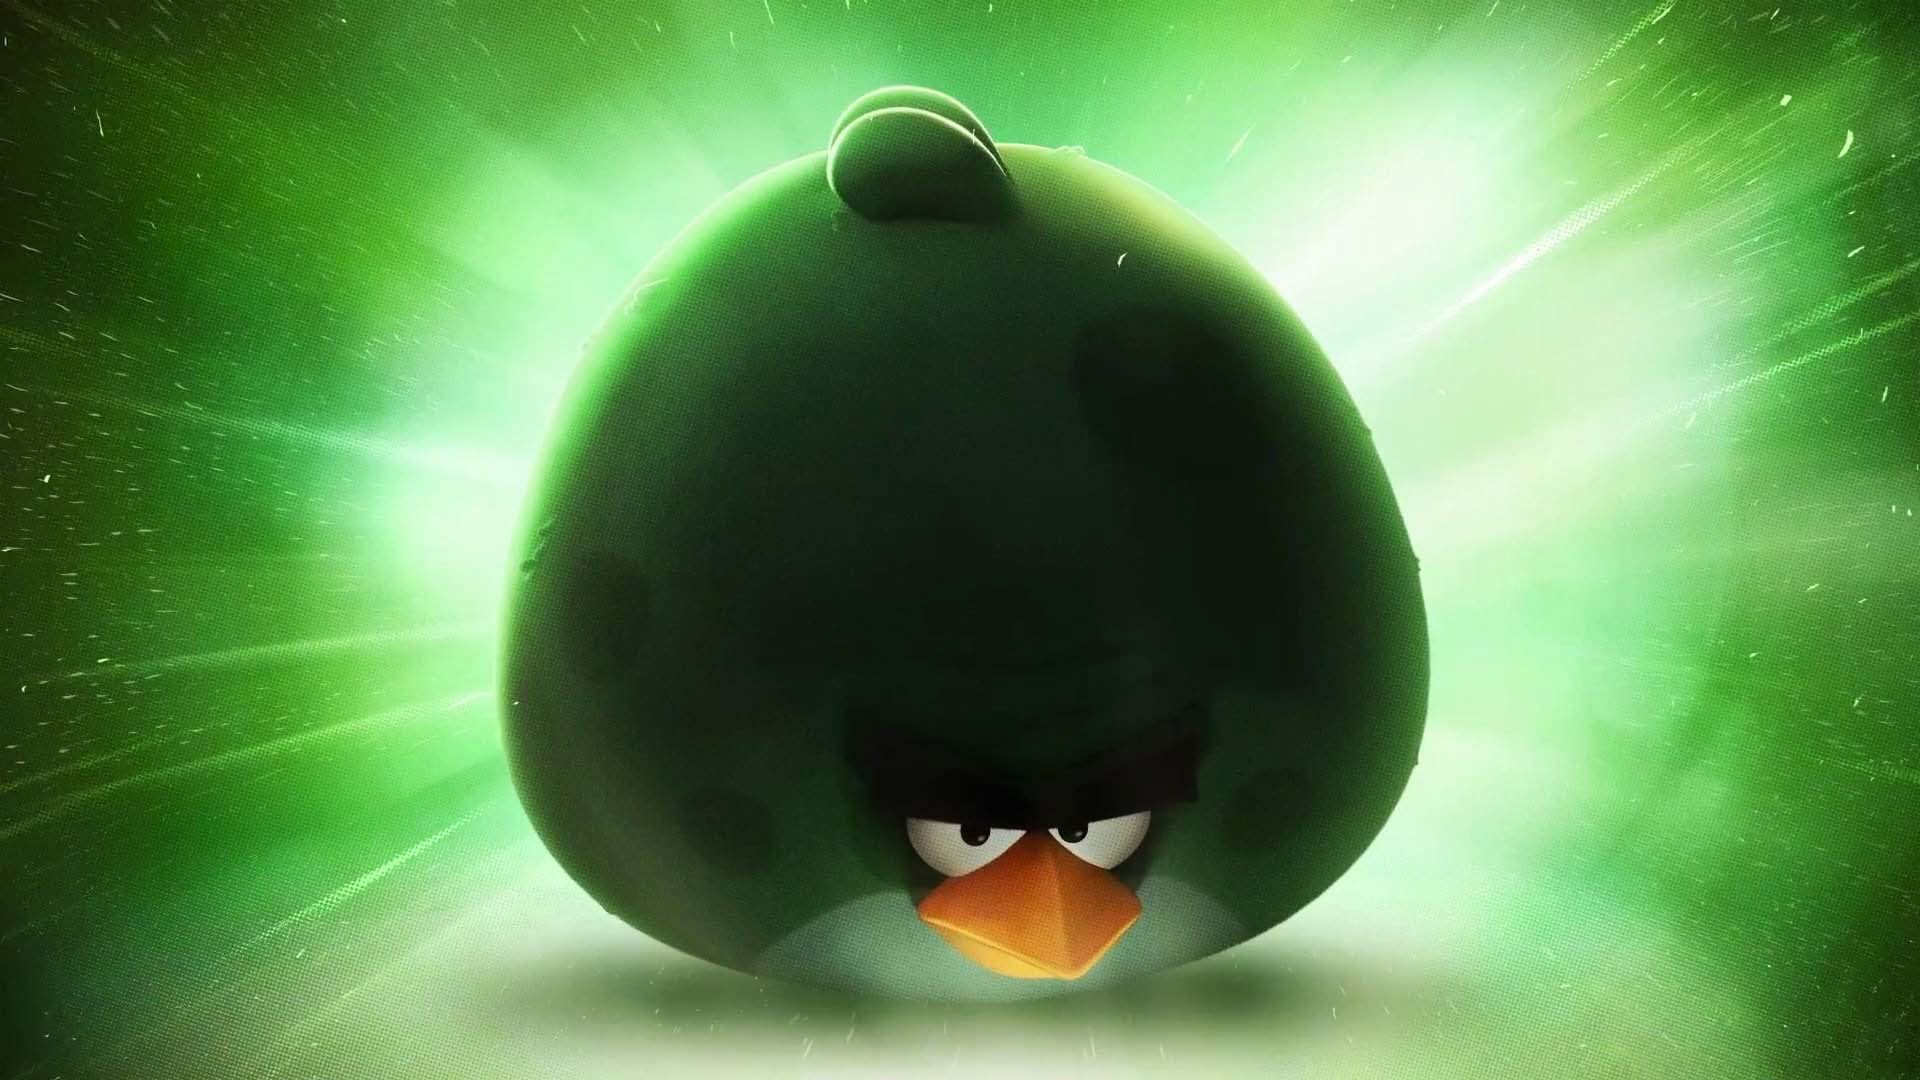 angry wallpaper,angry birds,green,illustration,video game software,fictional character